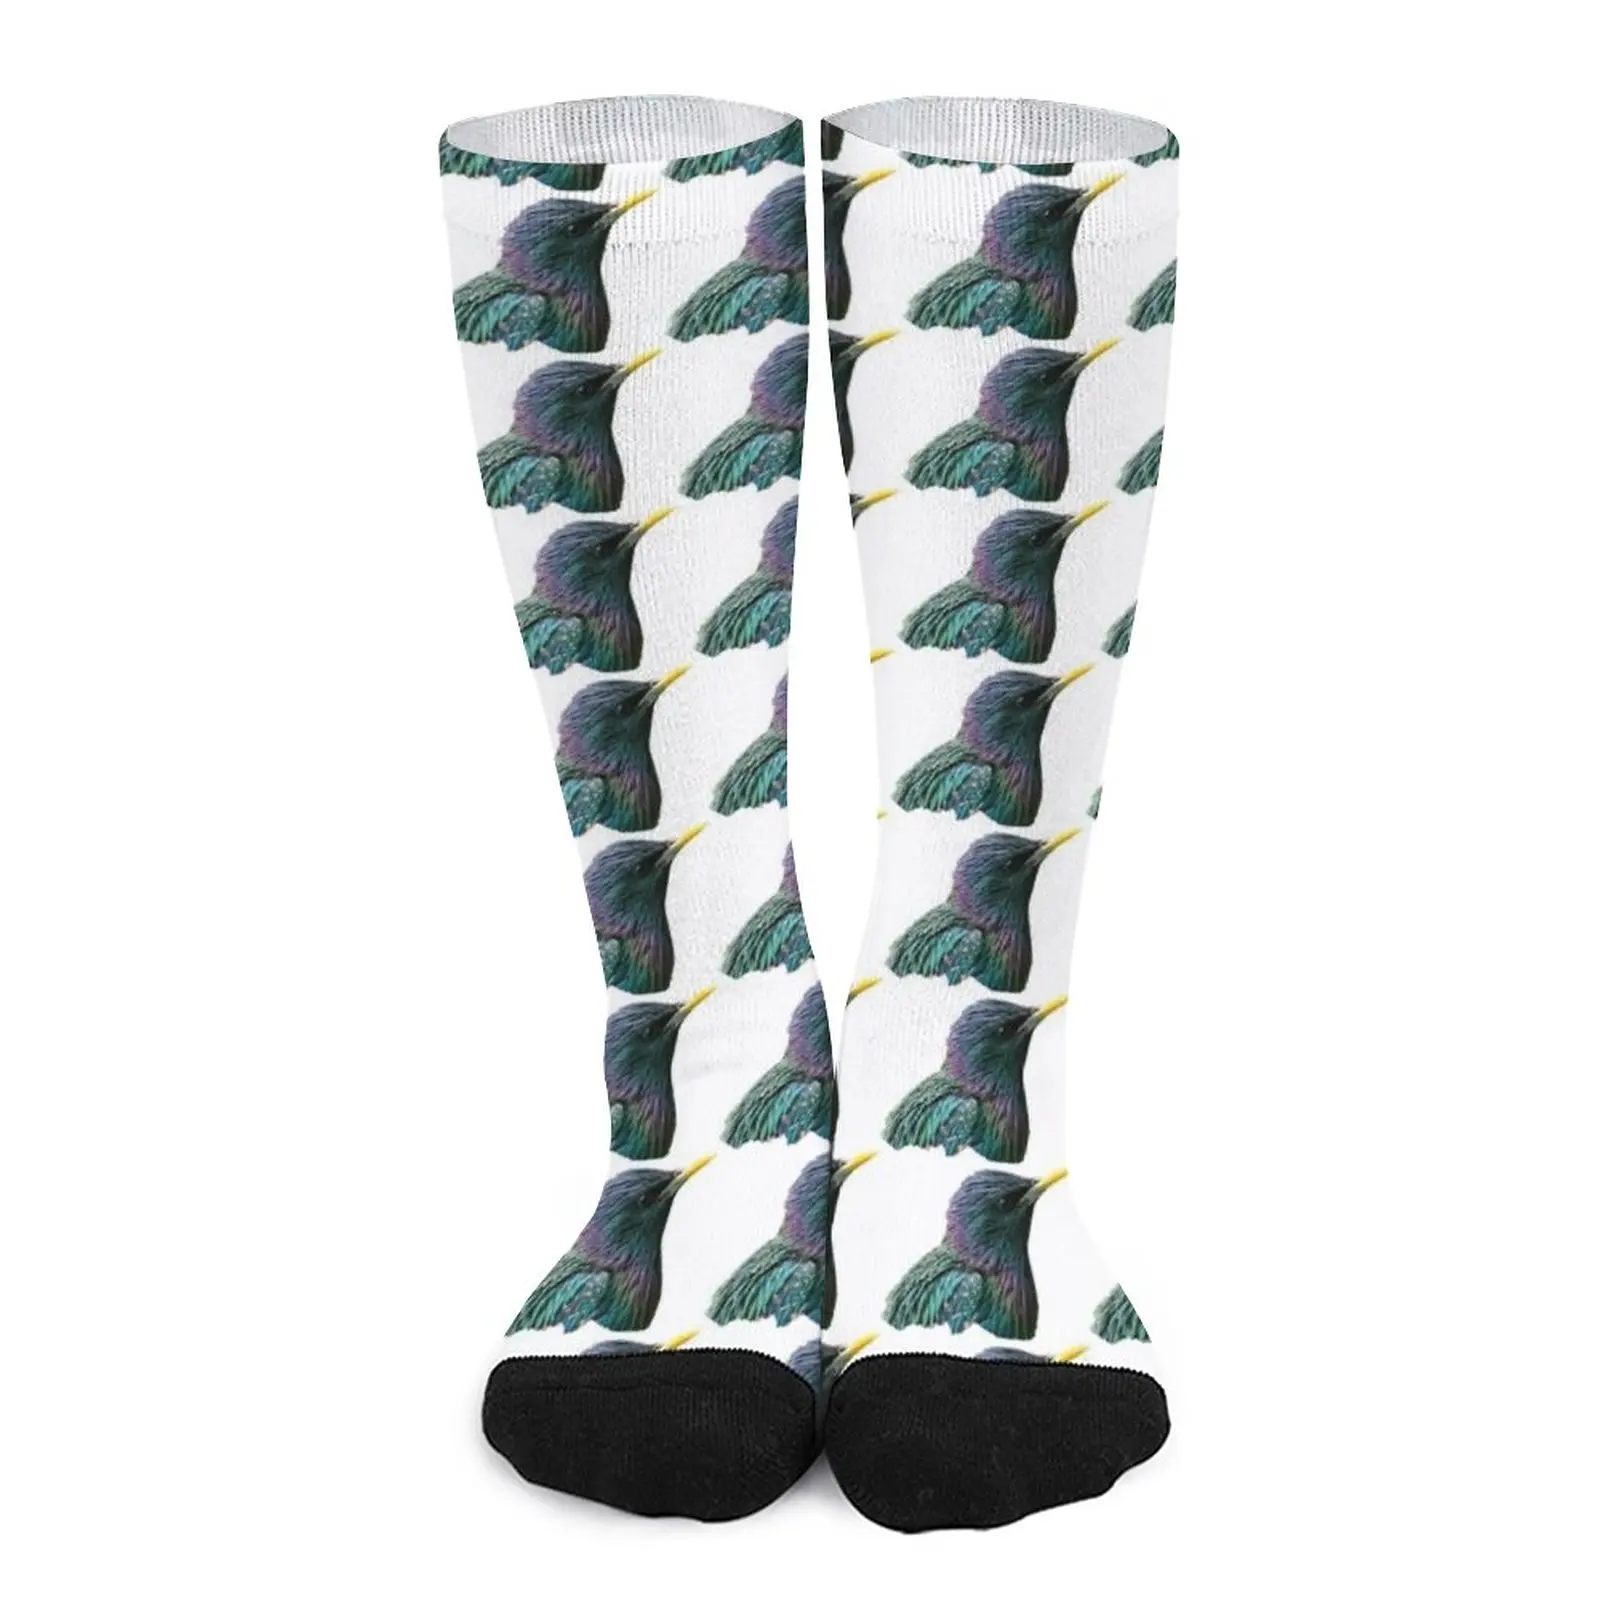 My Starling Socks Women socks ankle socks four lady and unicorn stories fantasy flowers animals red green floral collection socks ankle socks for women men s